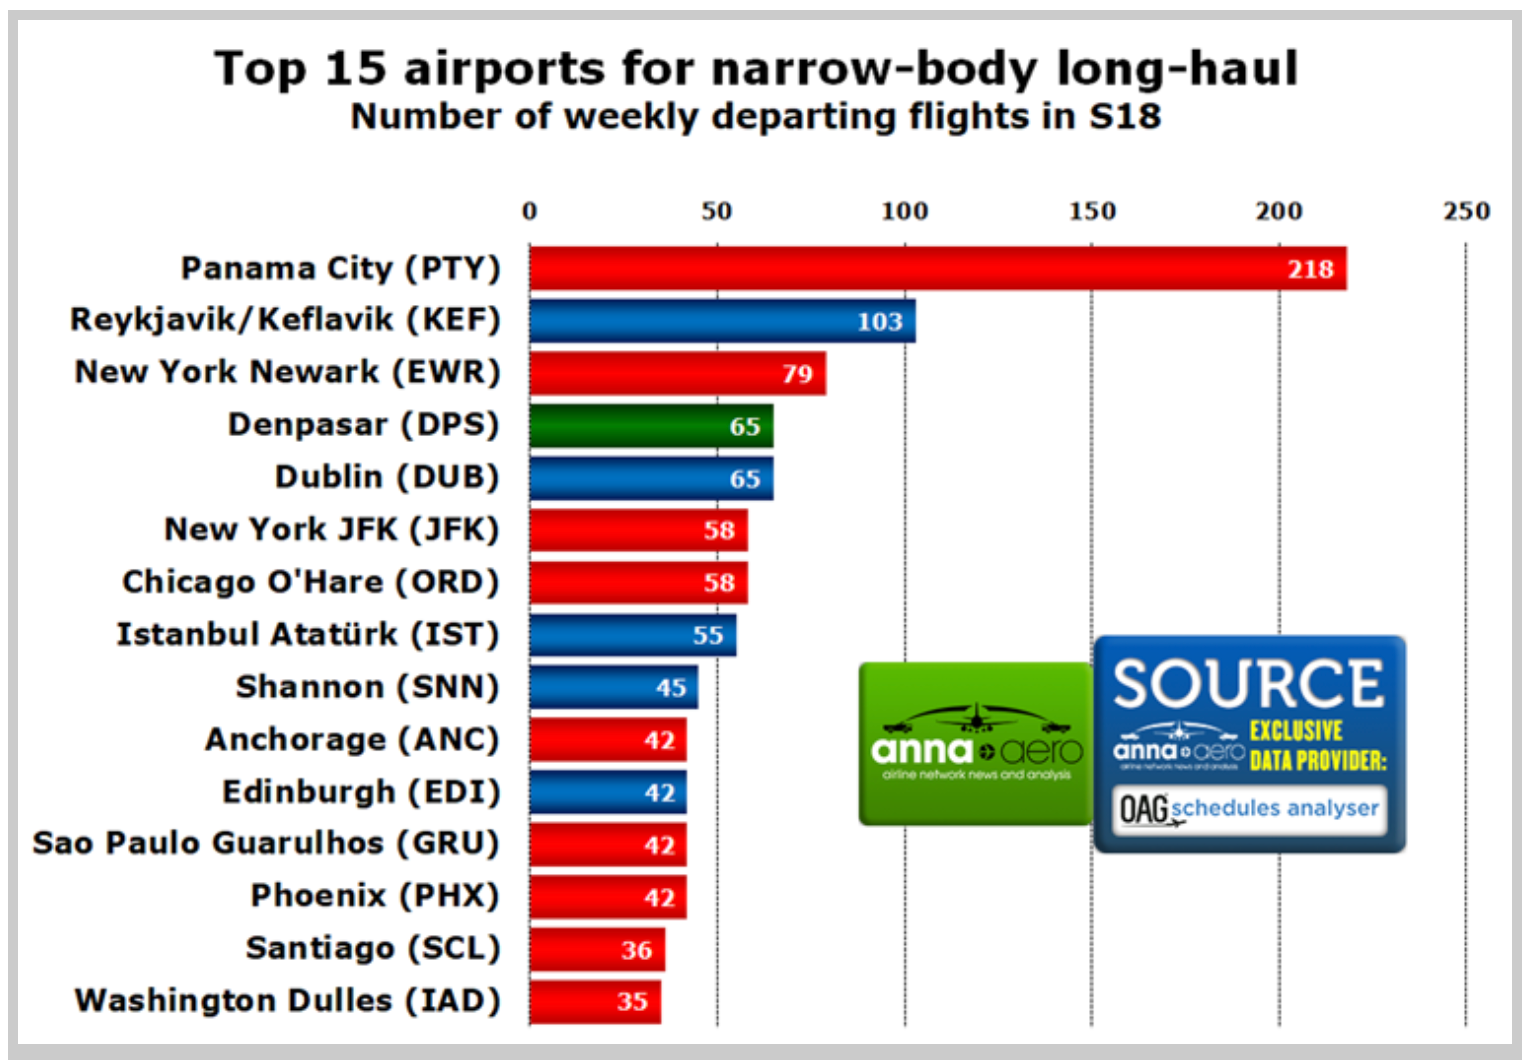 Narrow field: the leading airports for long-haul, narrow-bodied aviation